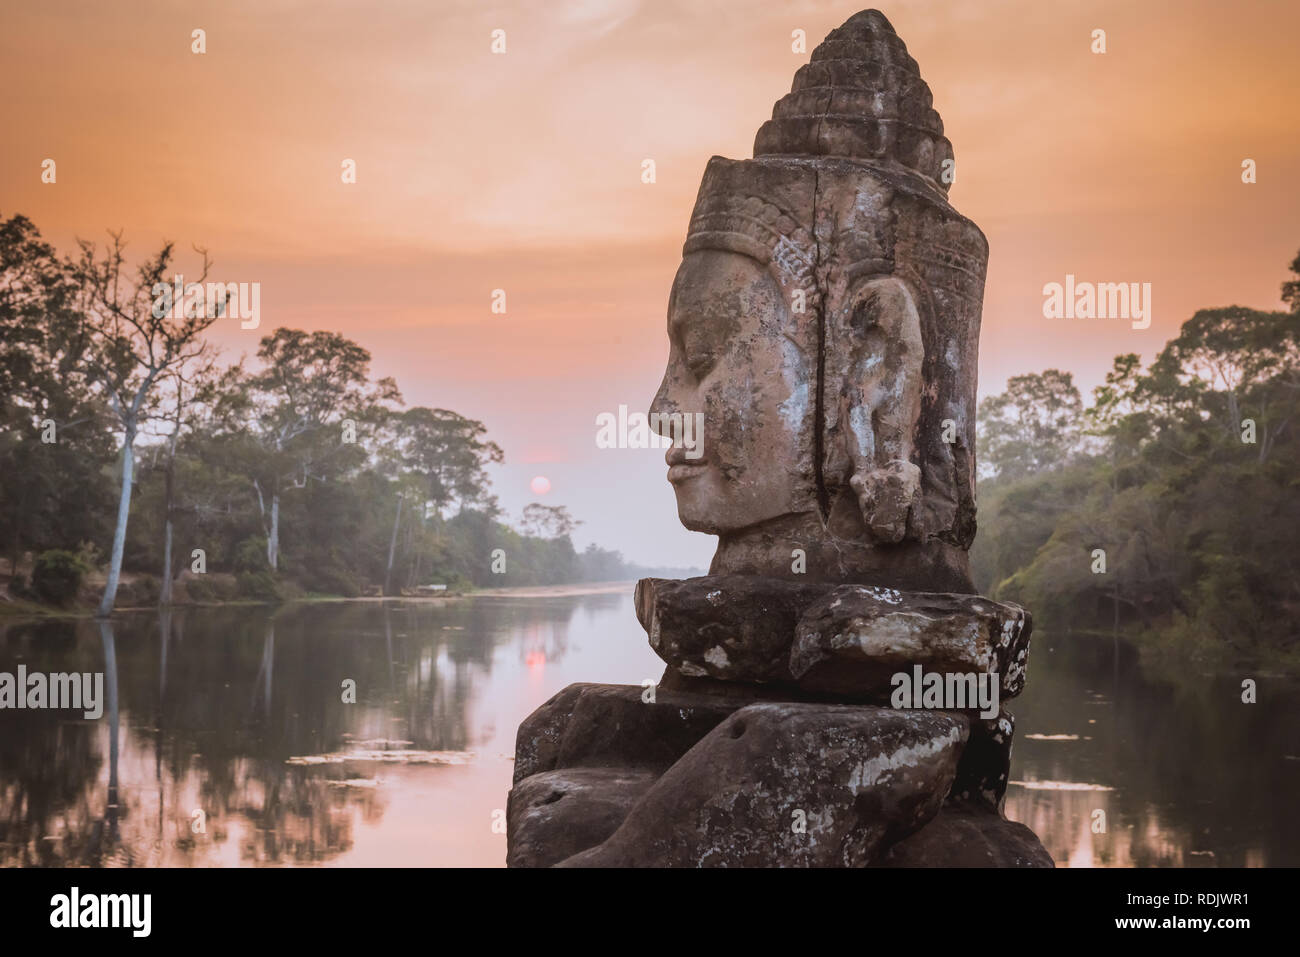 Stone Asura on causeway near South Gate of Angkor Thom in Siem Reap, Cambodia. Beautiful sunset over ancient moat in background. Angkor Thom is a popu Stock Photo